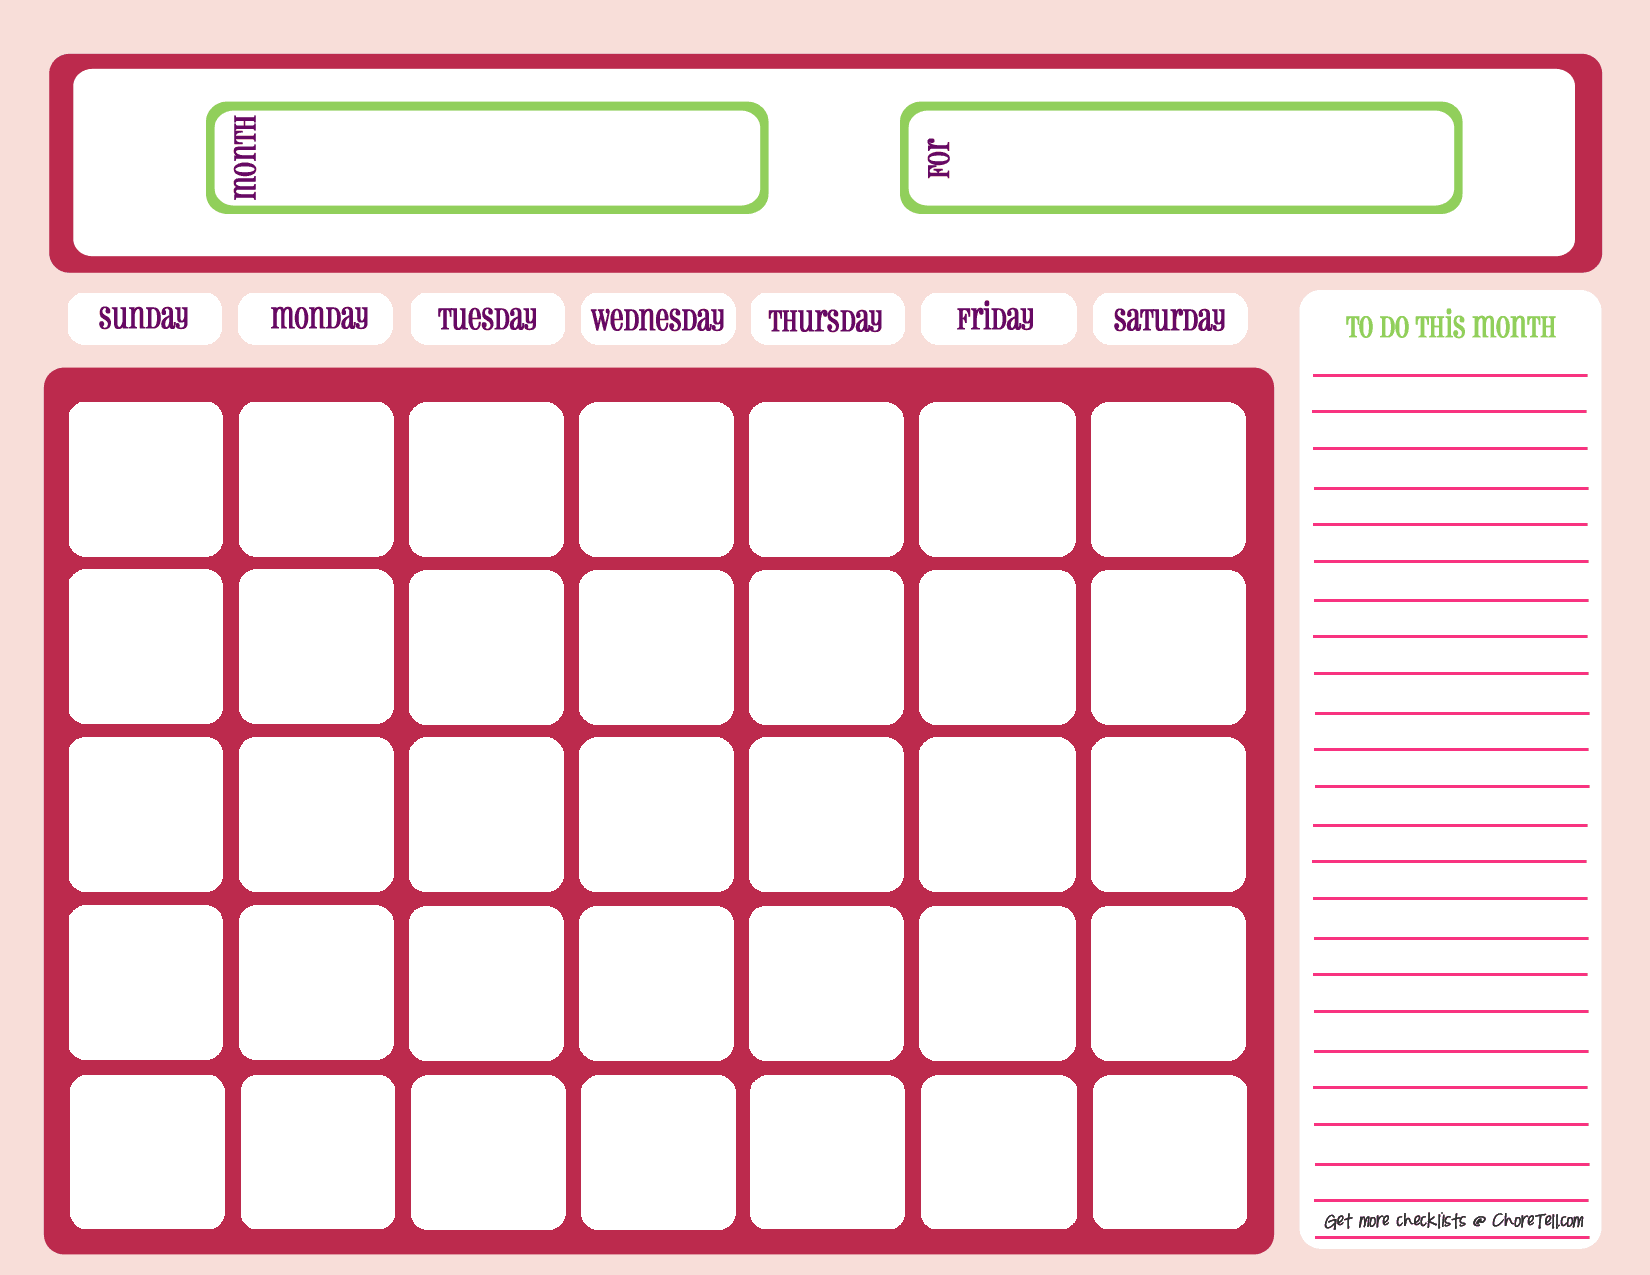 Monthly Chore Chart